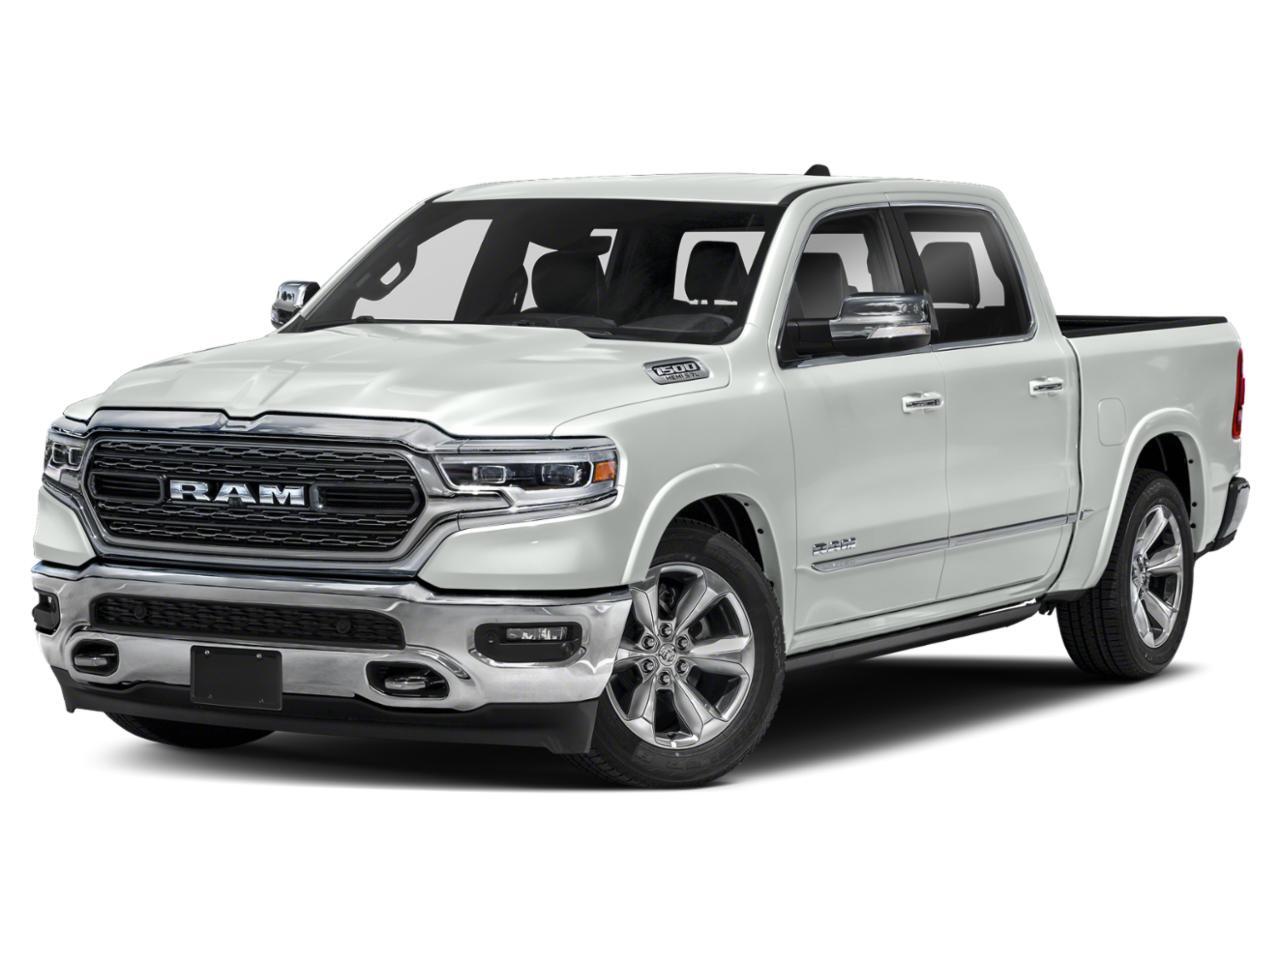 2020 Ram 1500 Limited Diesel | Bed Utility Grp | Lvl 1 Equip Grp